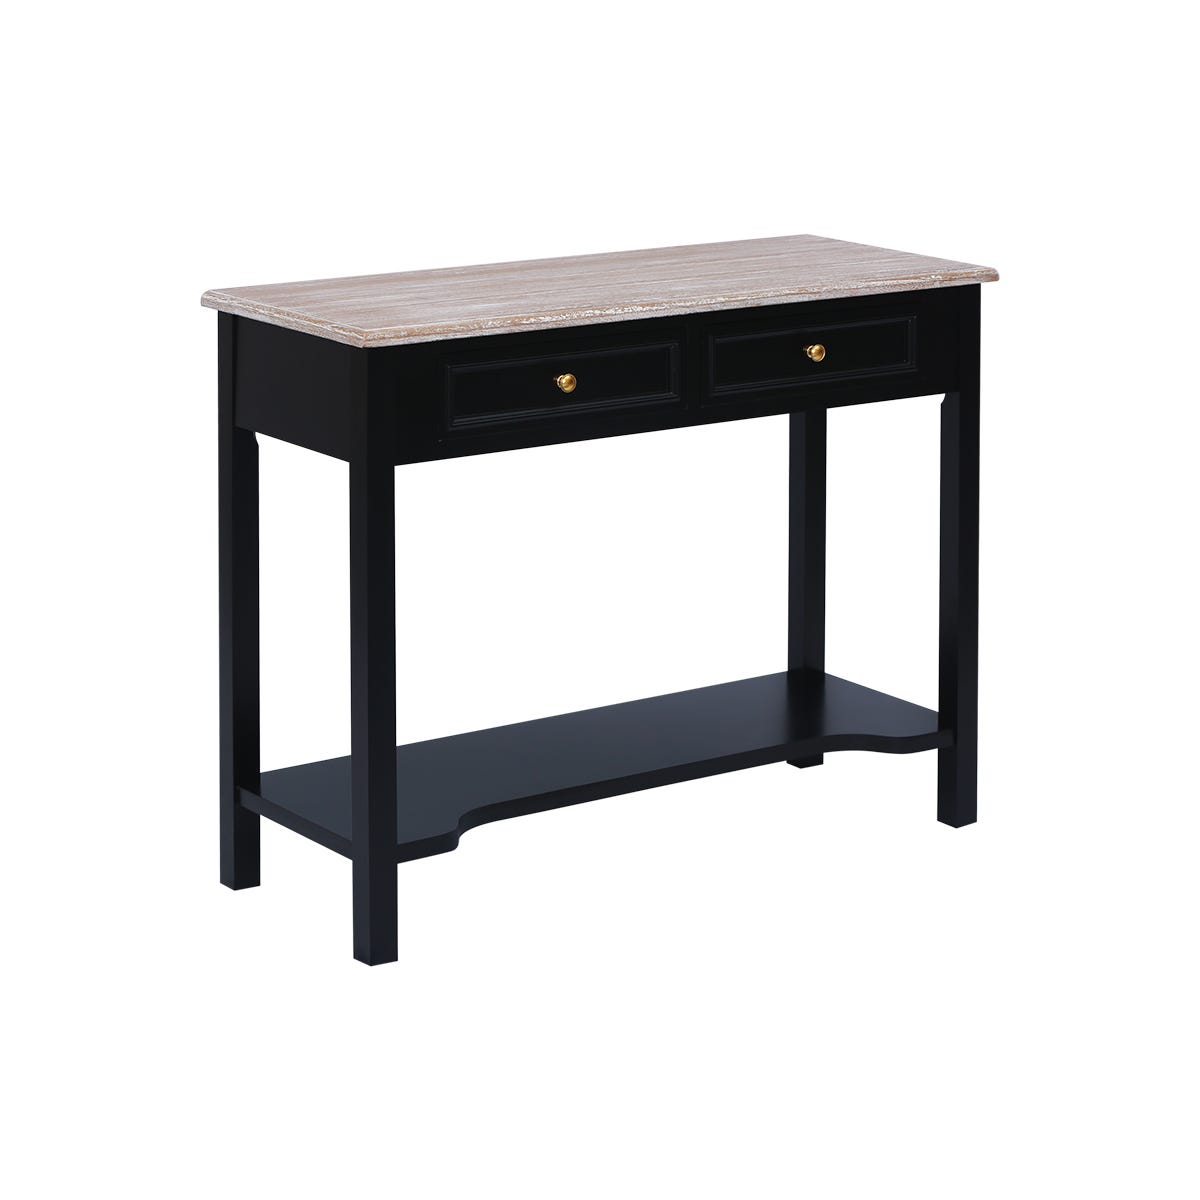 Charles Bentley Loxley 2 Drawer Console Table Black